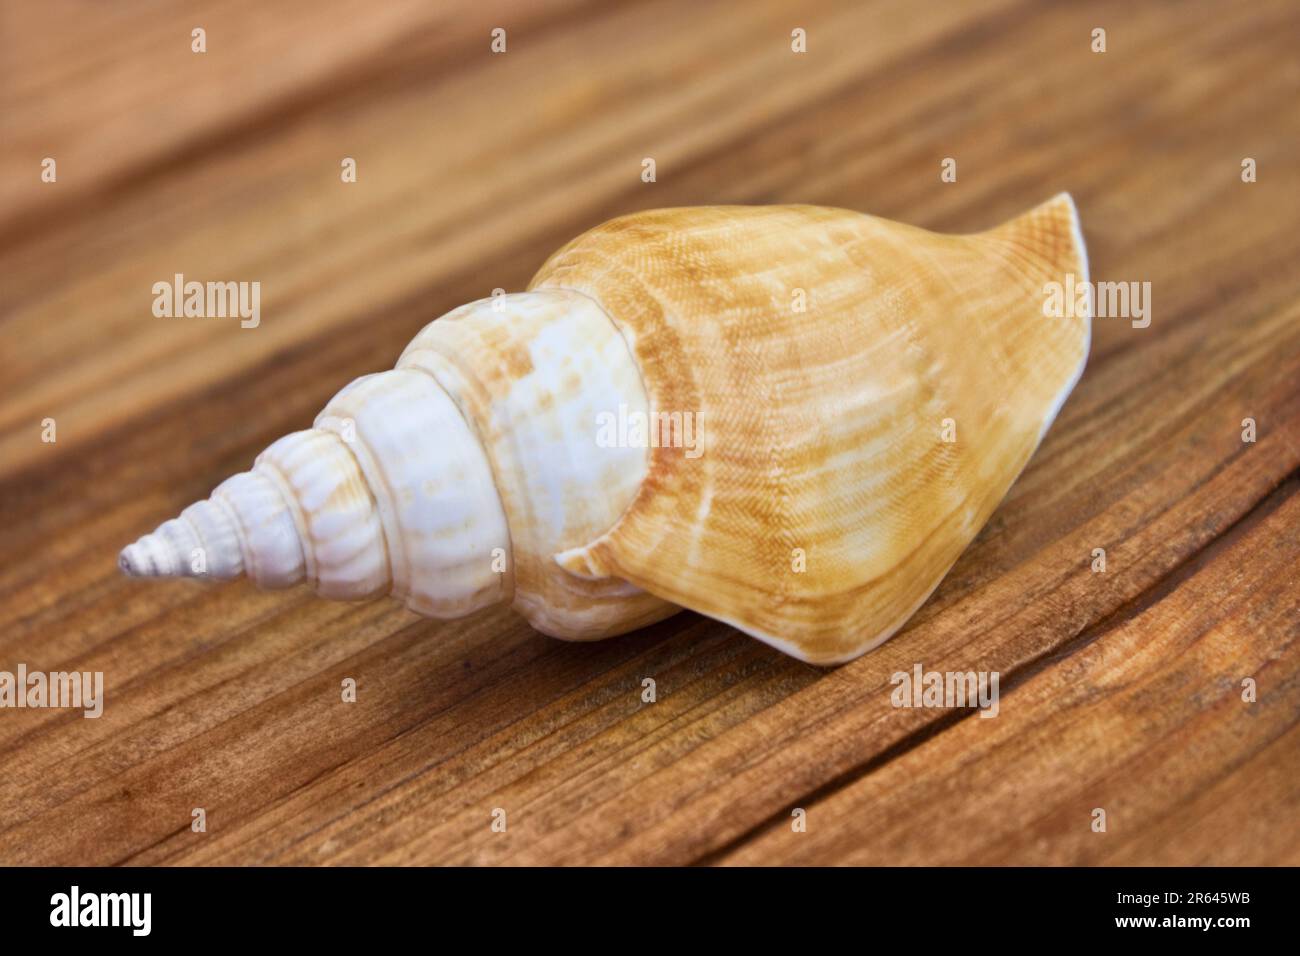 Seashell on wooden background close up Stock Photo